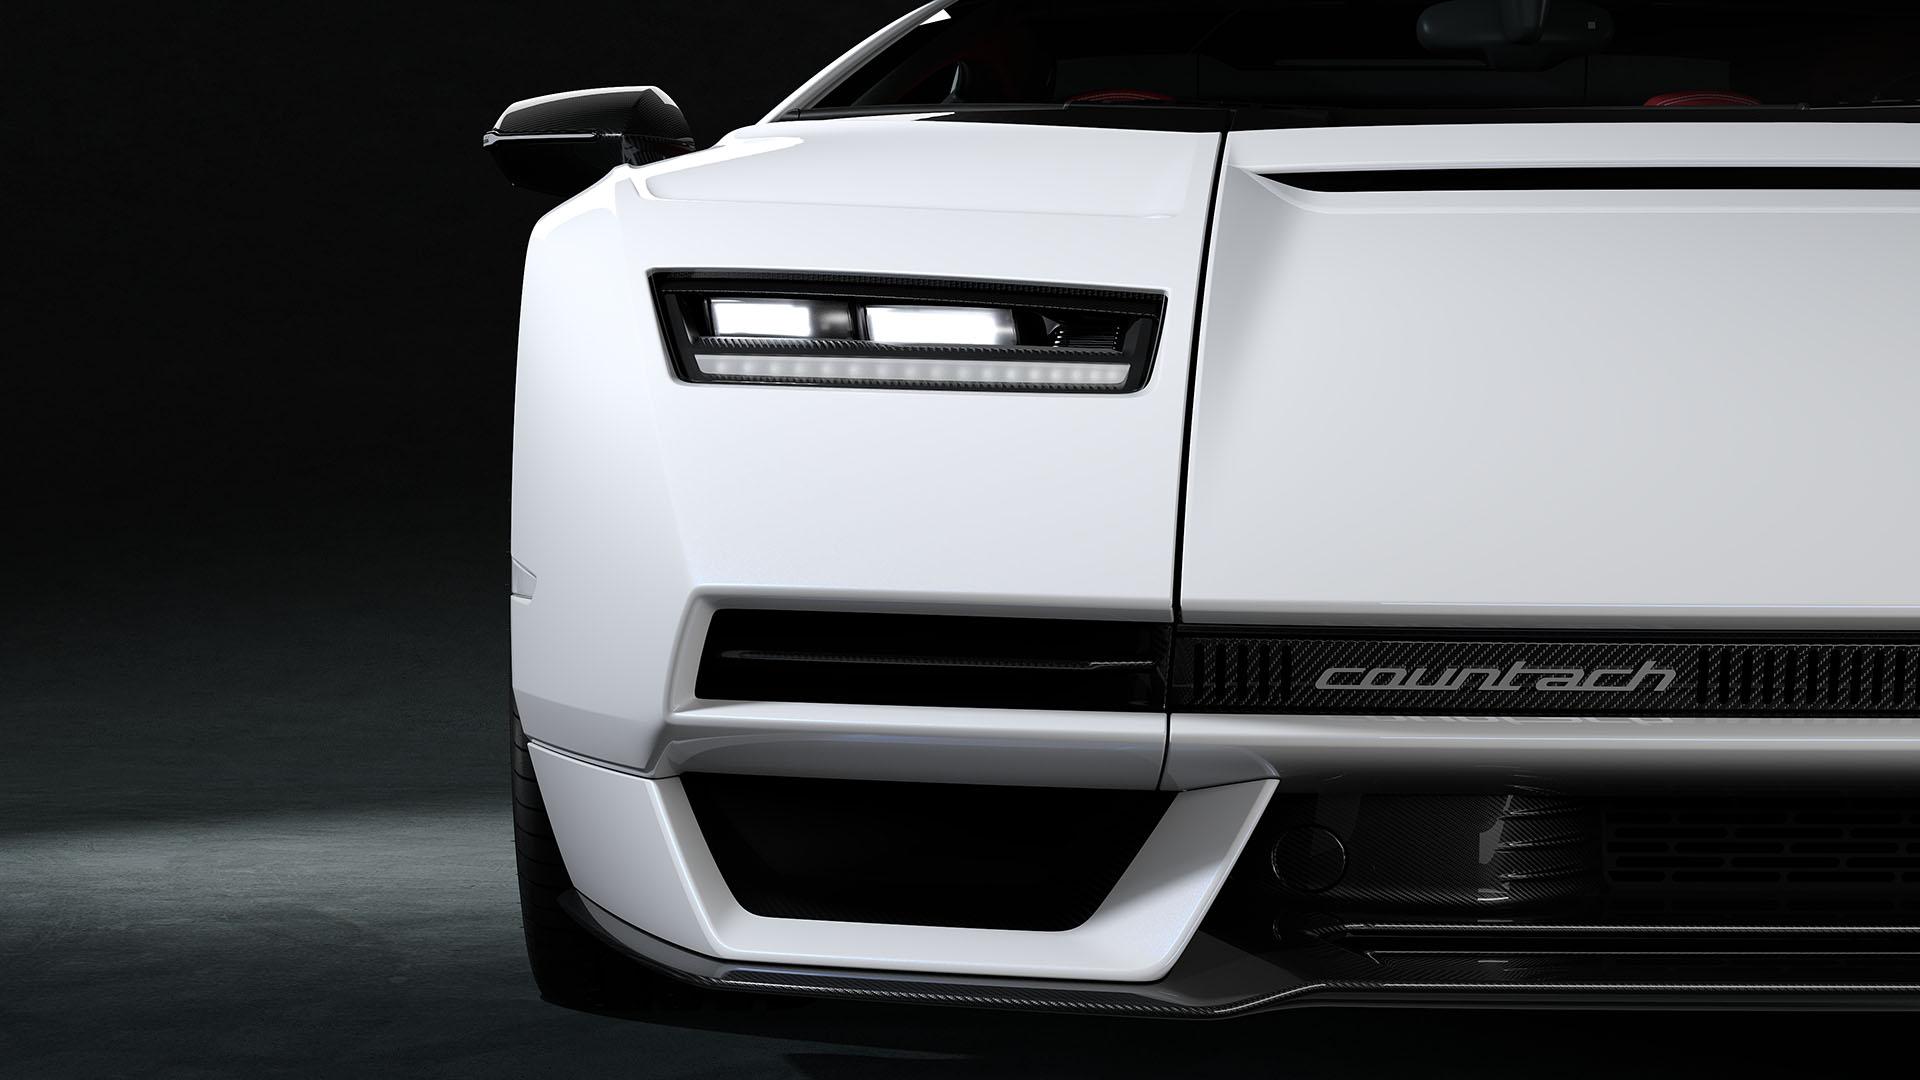 Closeup of the right headlight on the countach